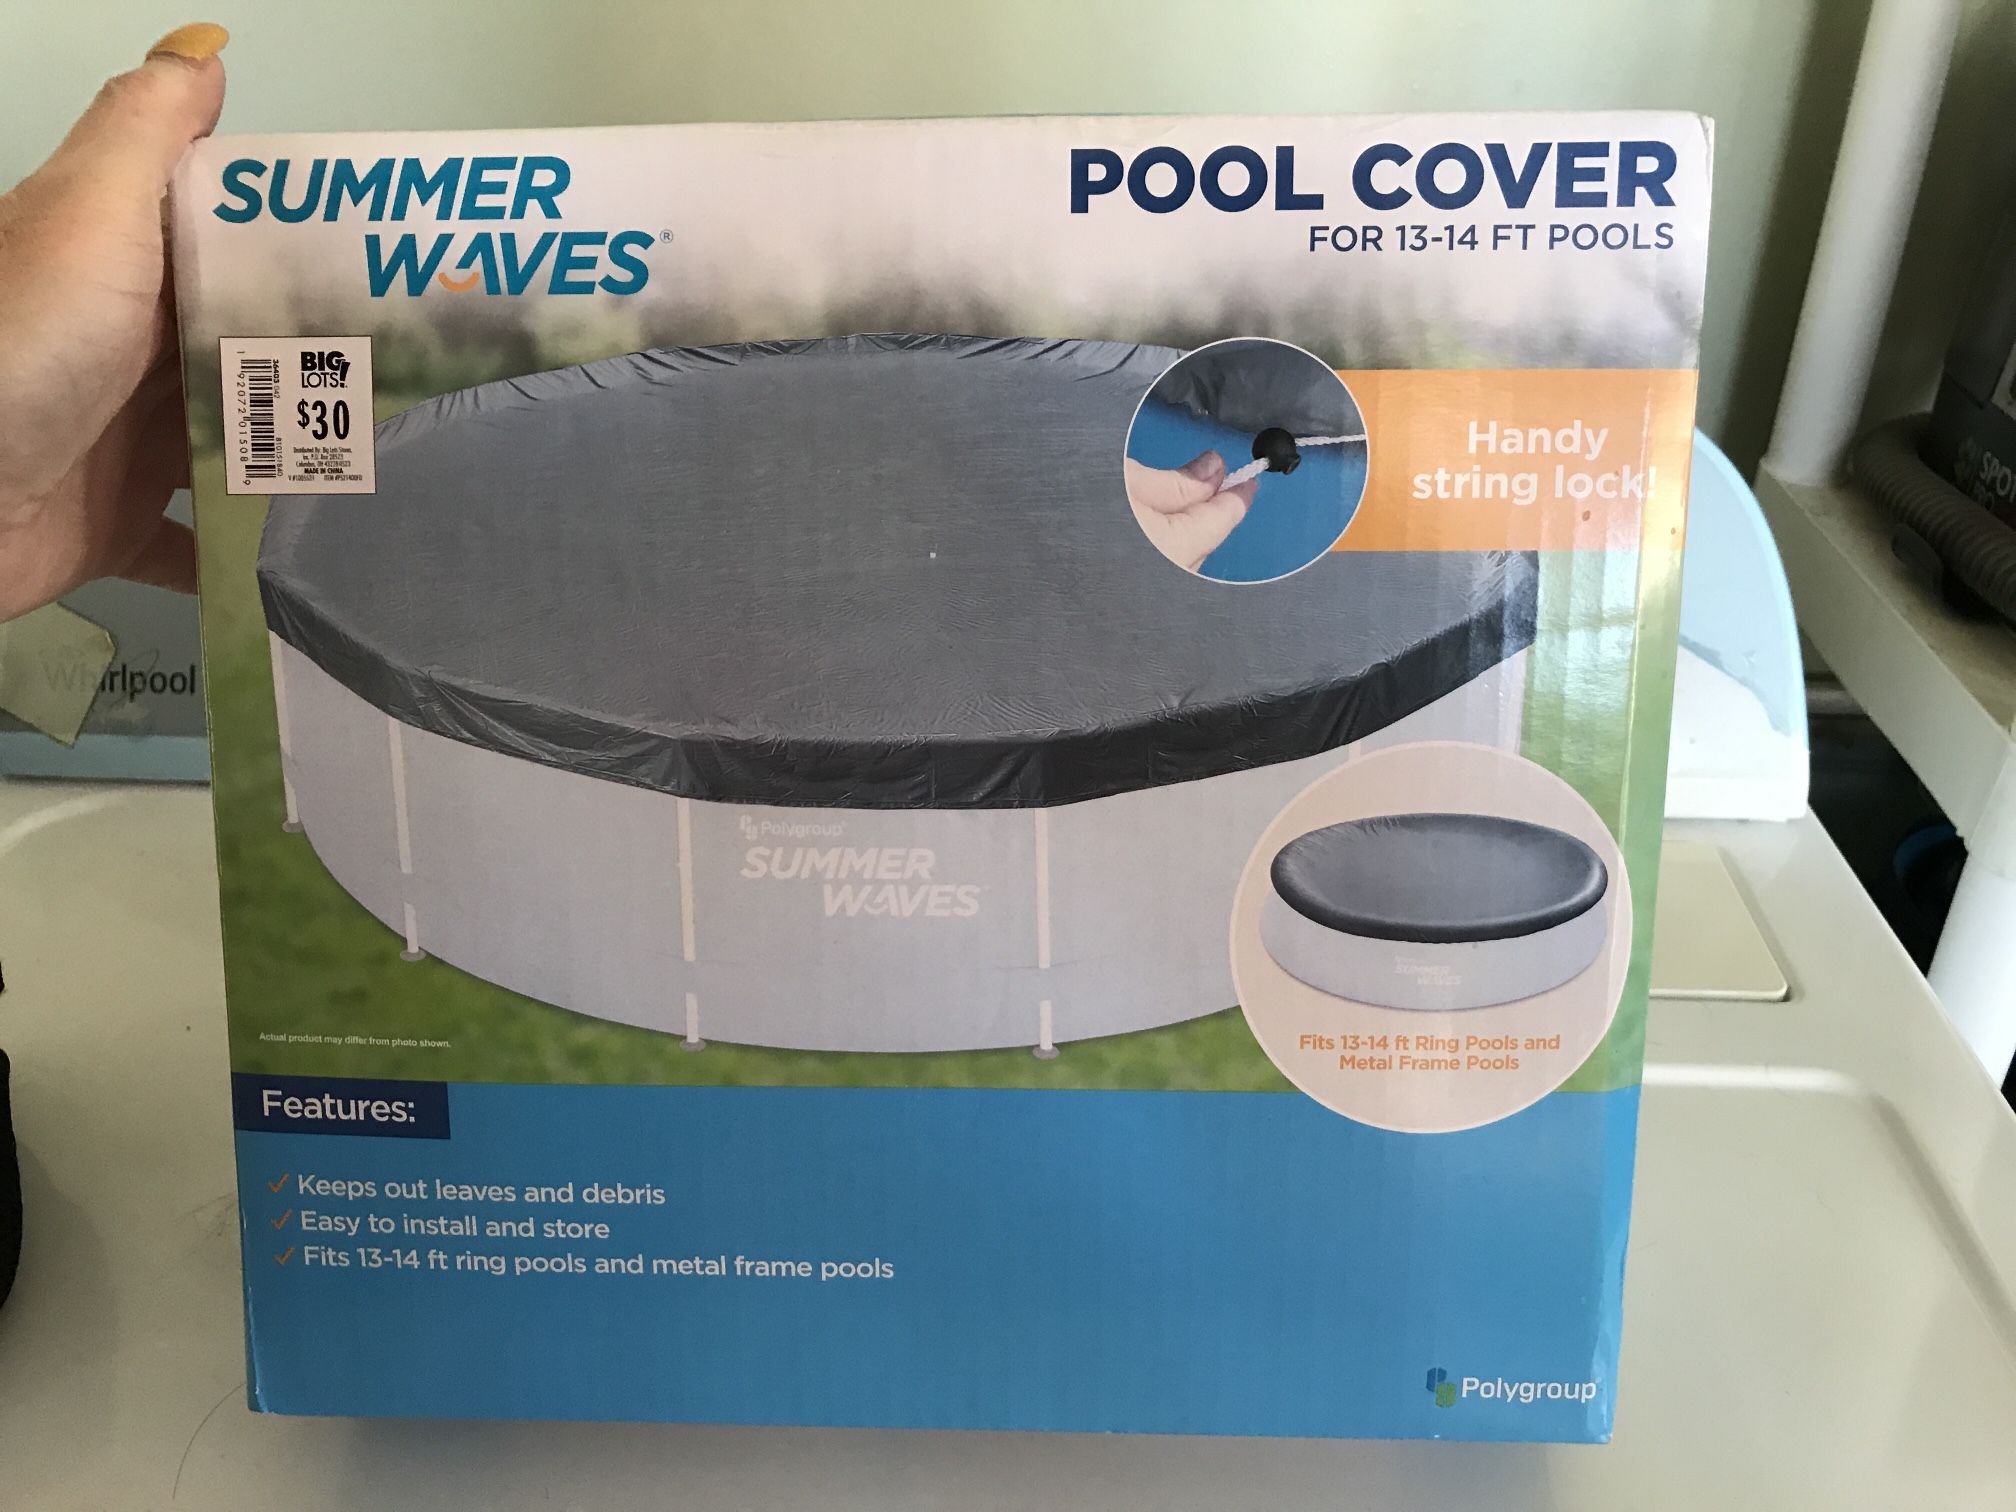 Pool Cover ( New In The Box ) 